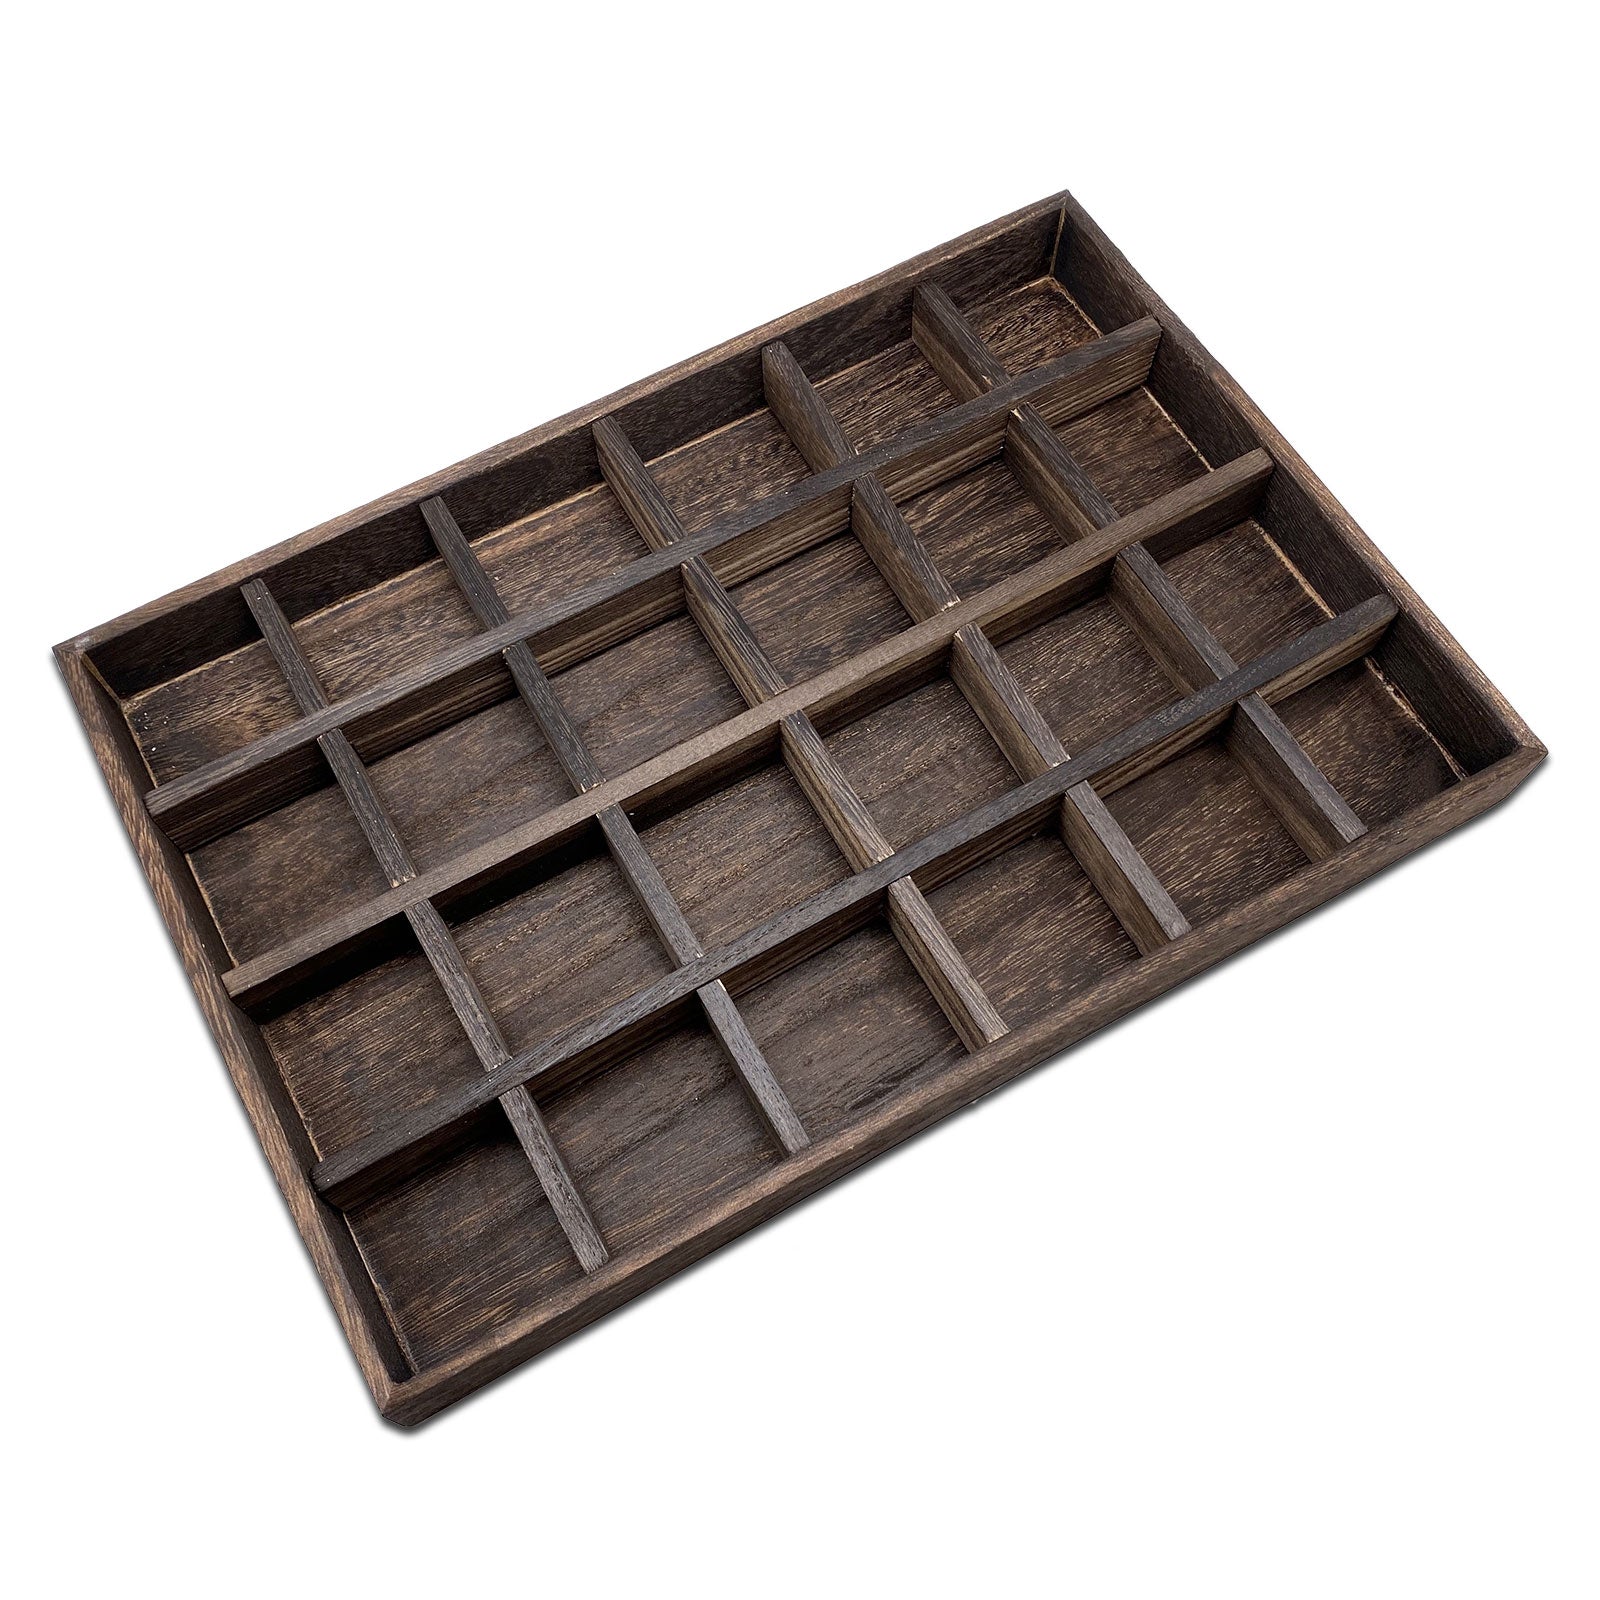 24 Compartment Wood Jewelry Display Tray